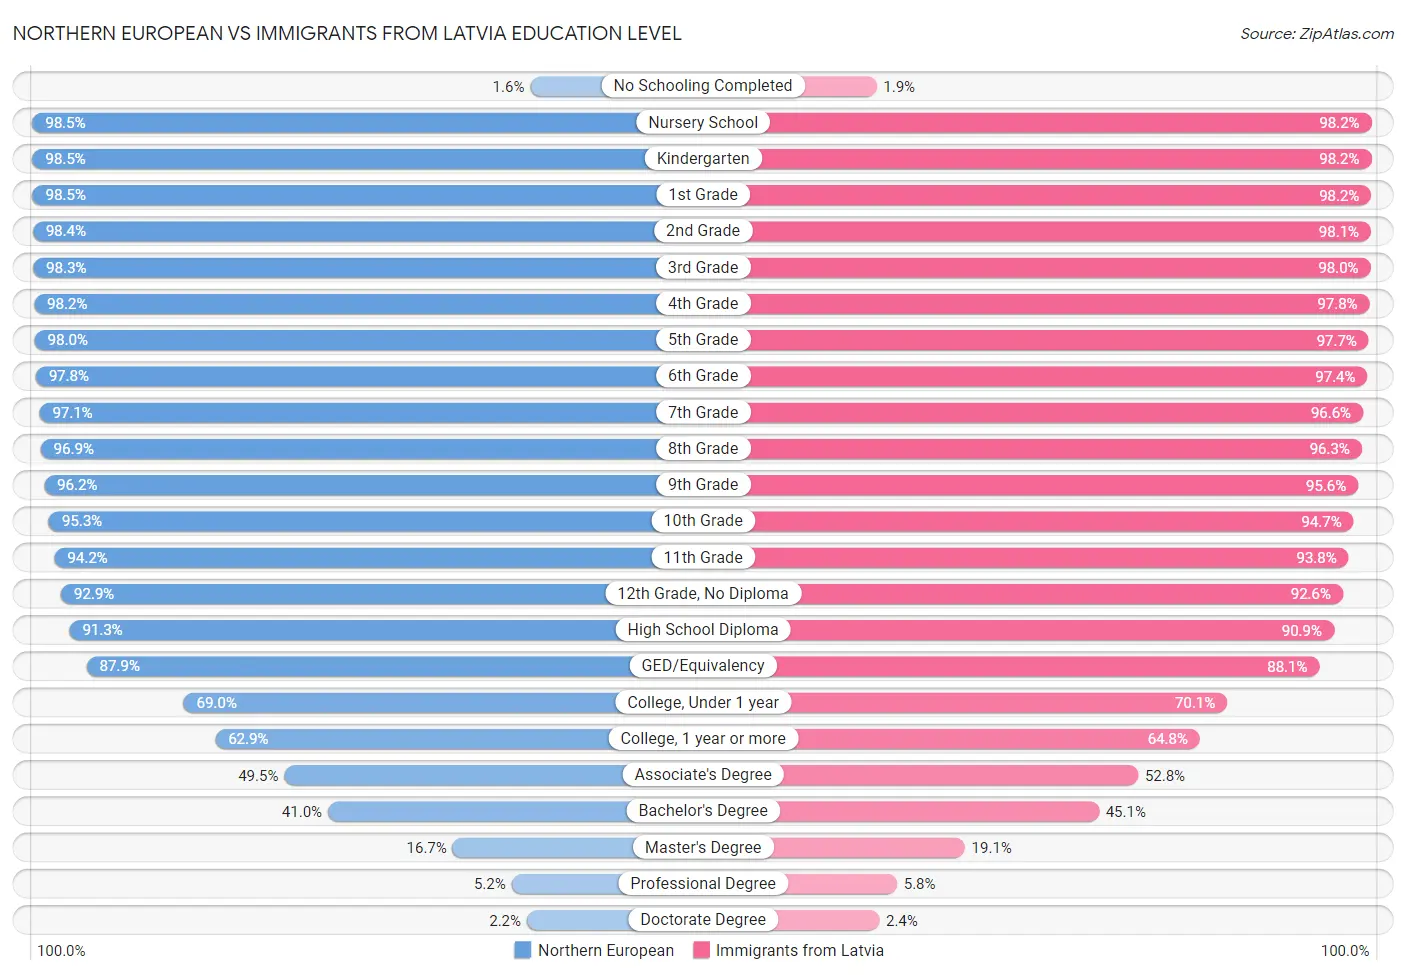 Northern European vs Immigrants from Latvia Education Level